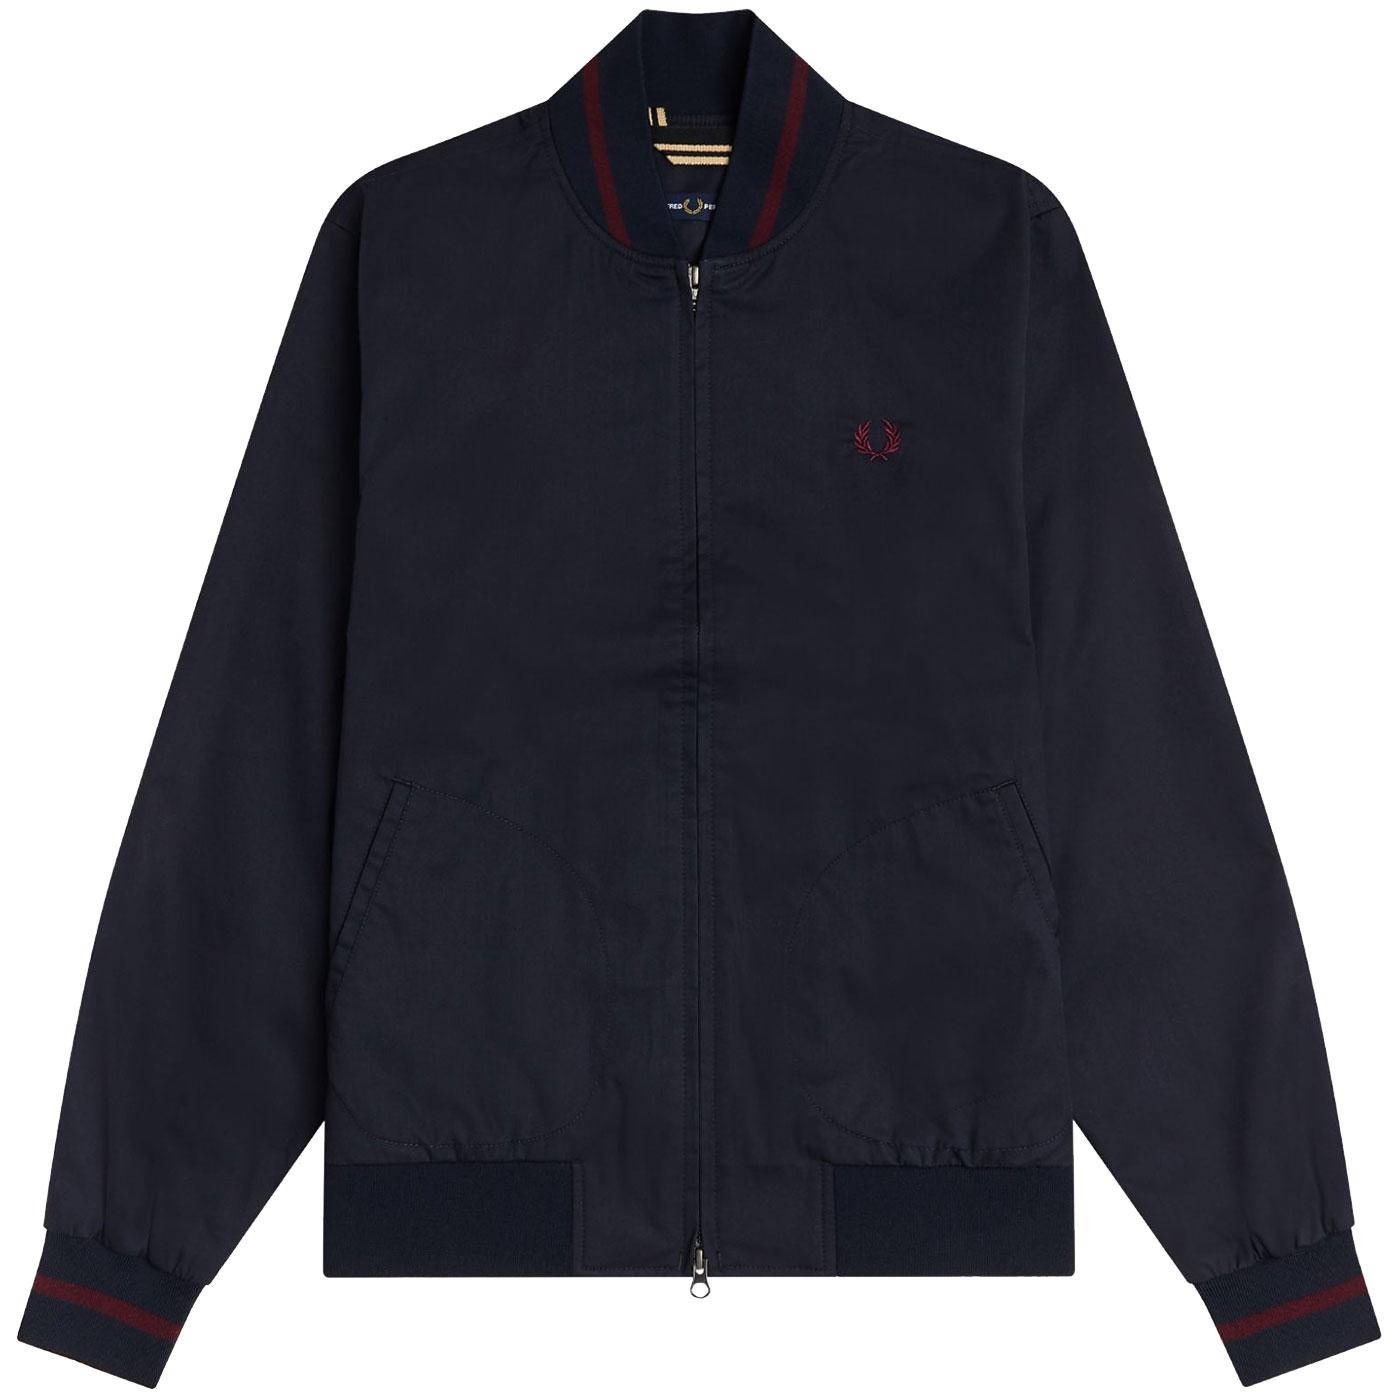 FRED PERRY Retro Mod Tennis Bomber Jacket (NAVY)